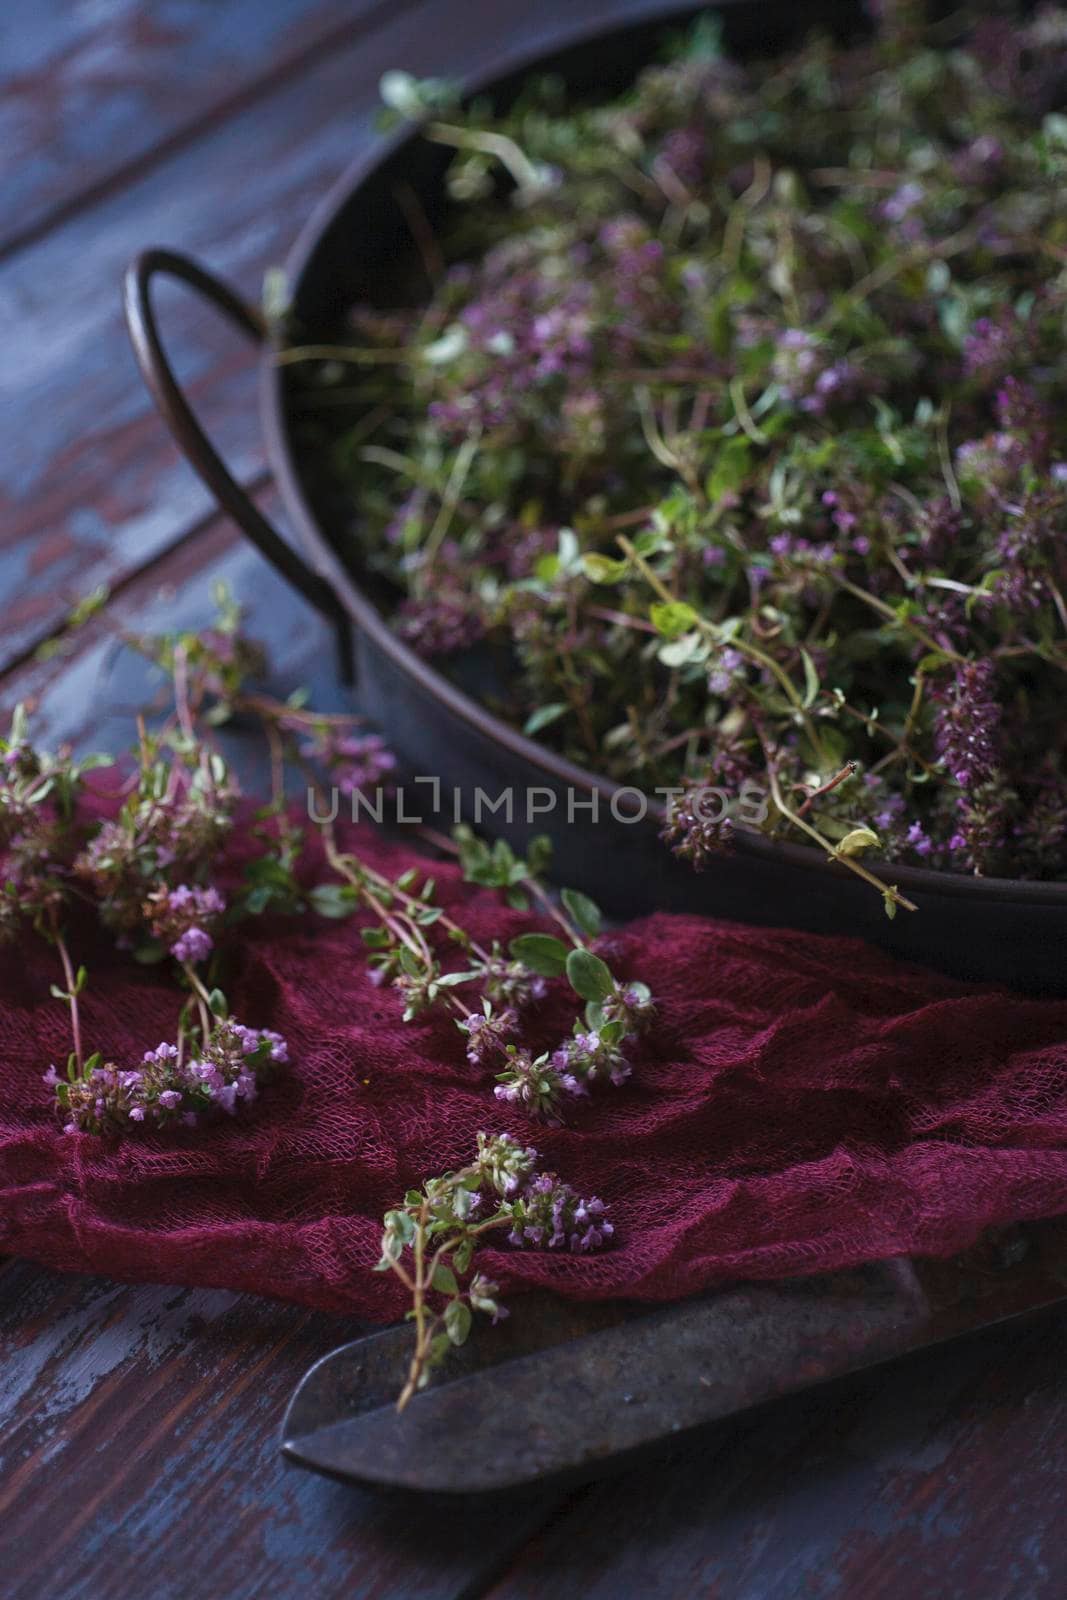 Vintage metal tray with fresh plants of wild thyme on blue wooden table with red cloth, still life with selective focus.